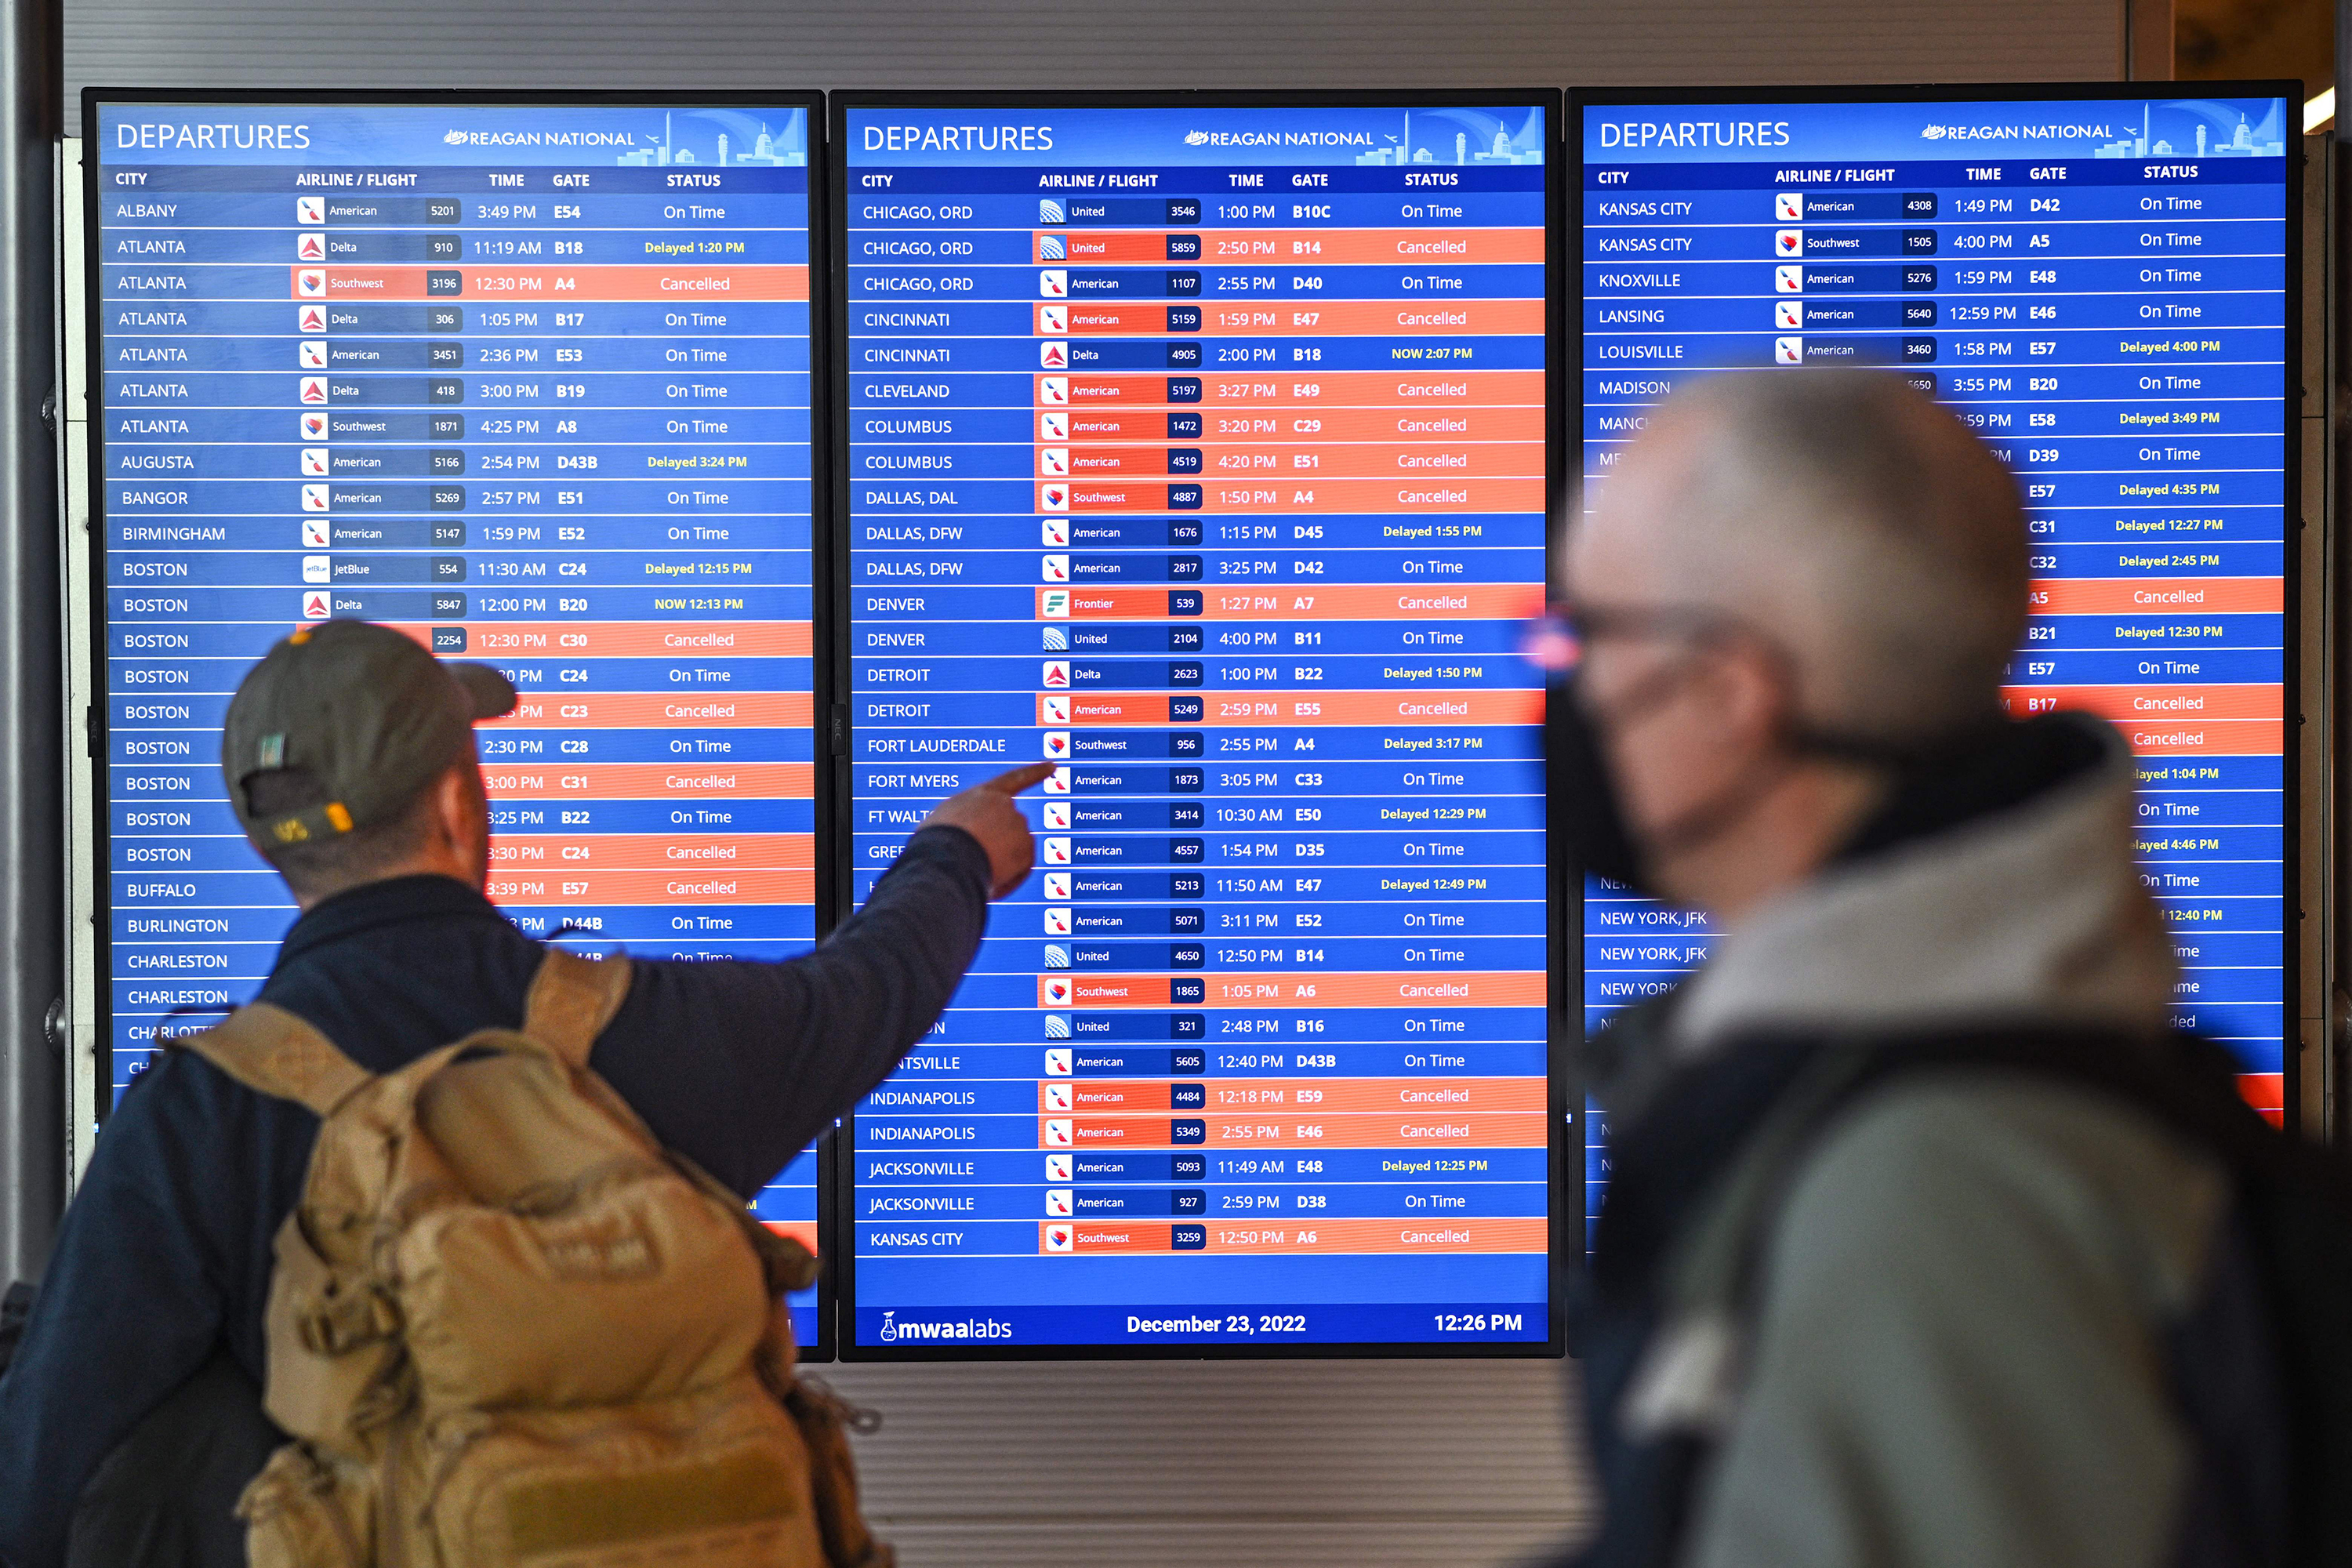 Passengers look at information boards showing flight cancellations and delays at Reagan National Airport in Arlington, Virginia, on Dec. 23.